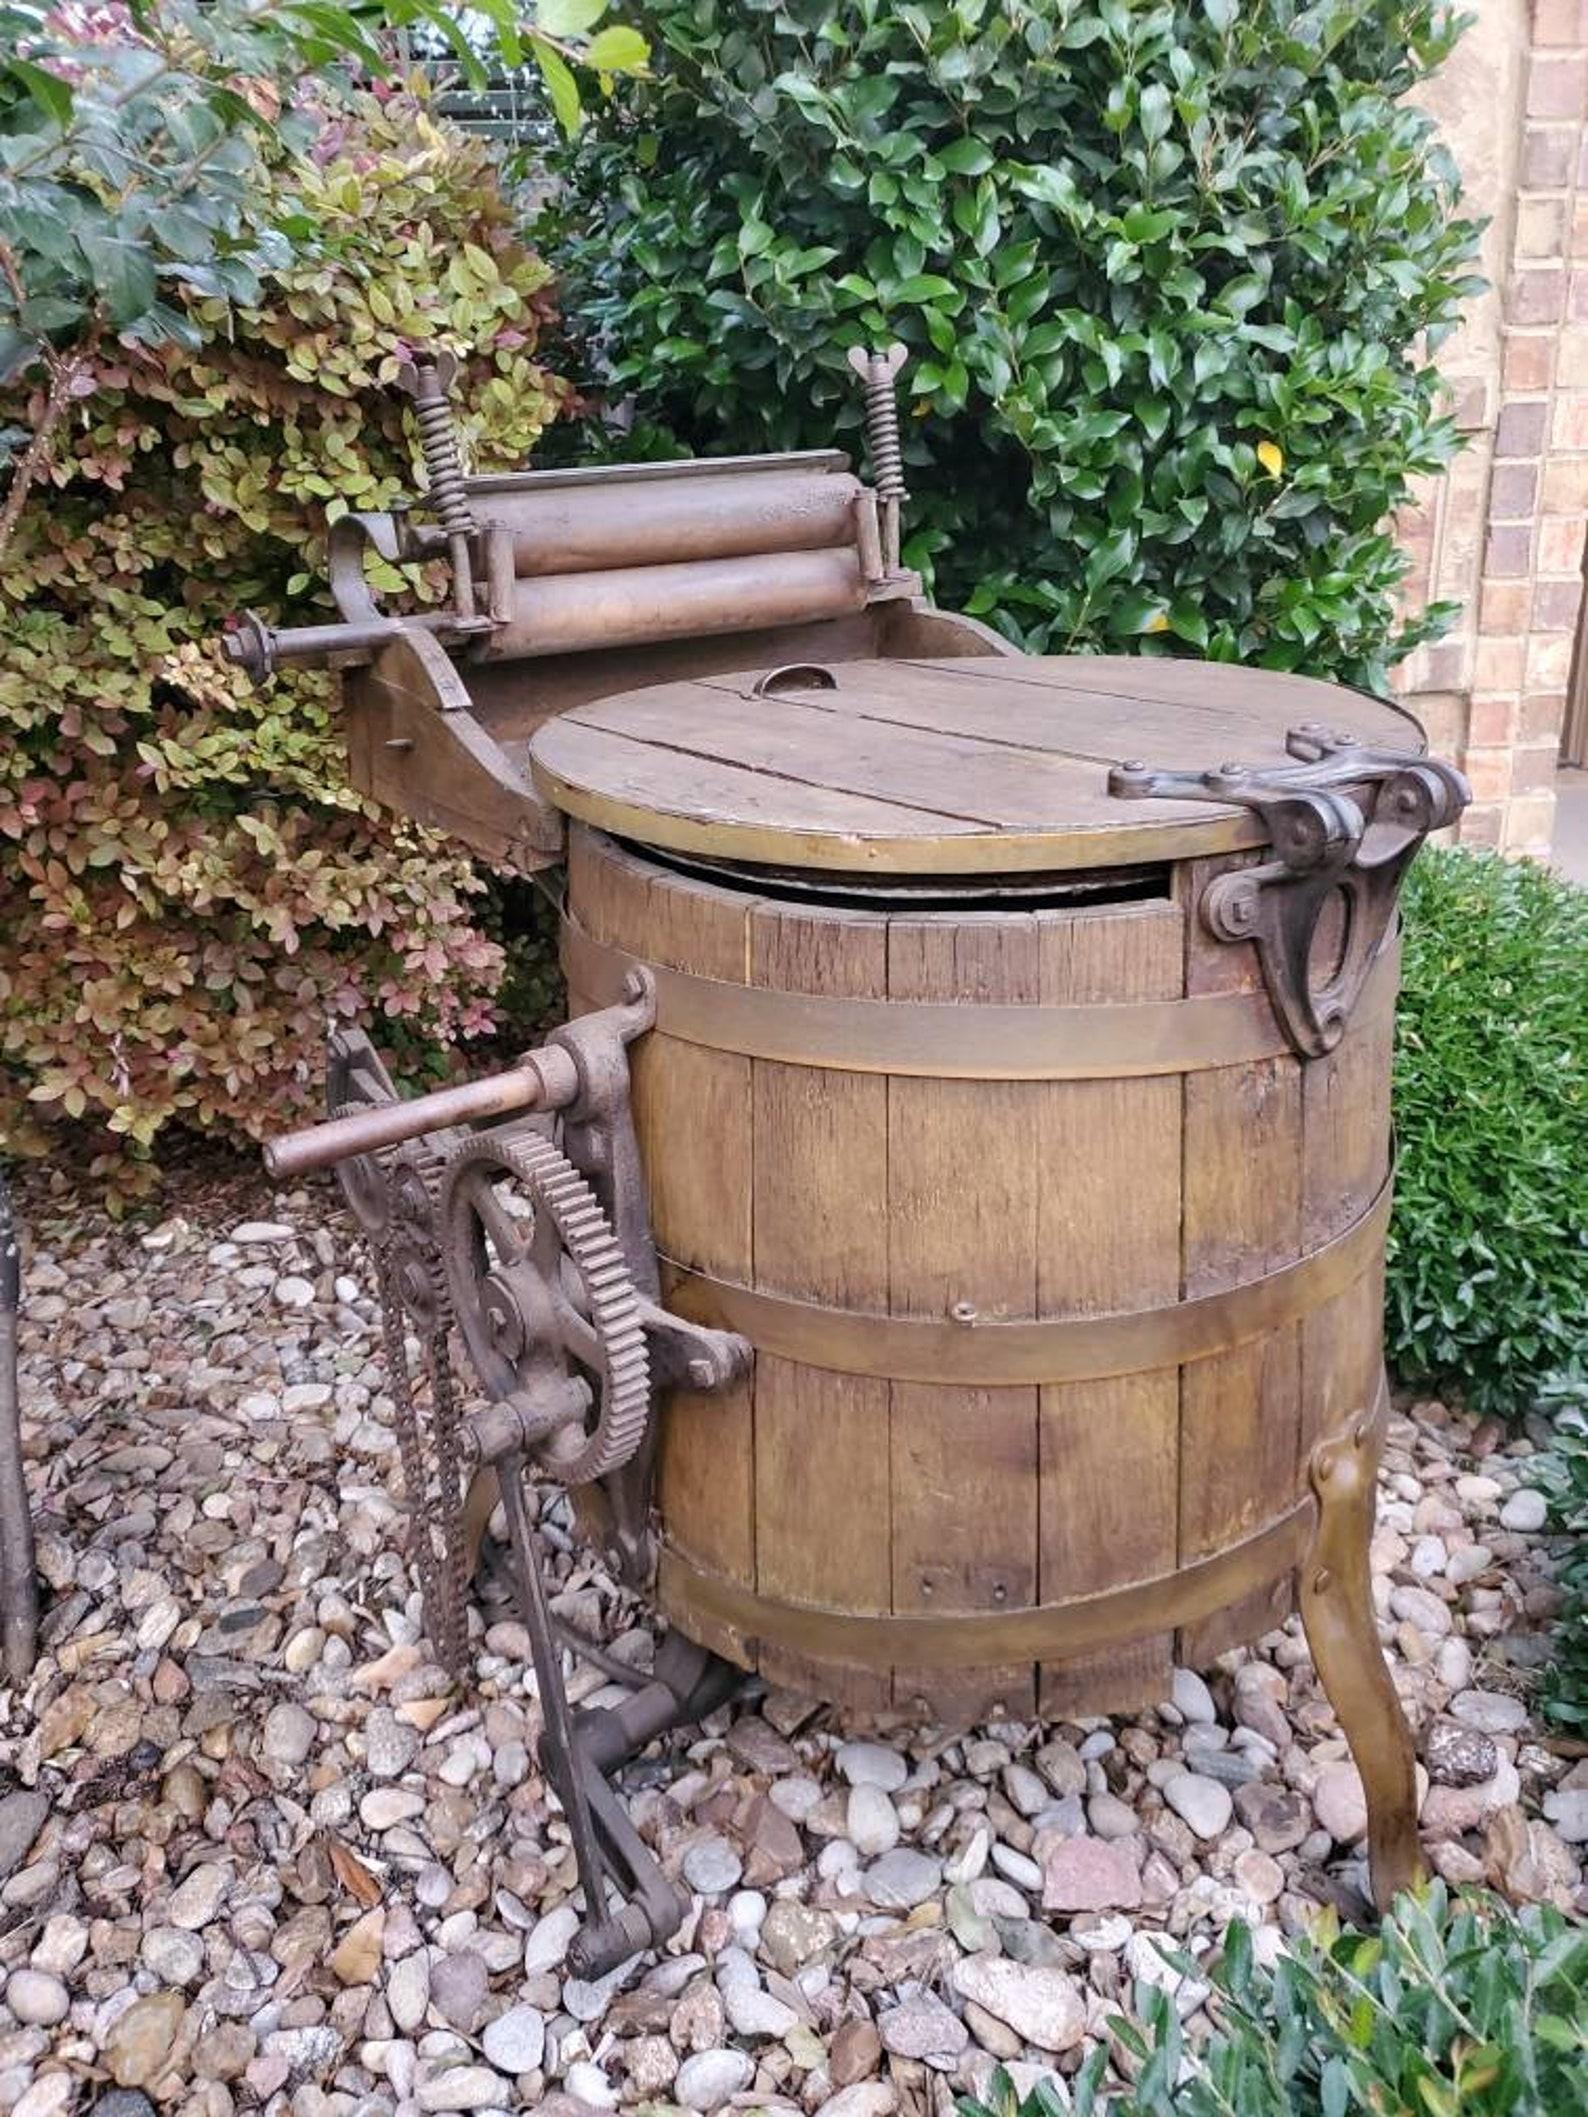 Impress all your neighbors with this magnificent piece of yard art! Or add an original rustic industrial element to your modern farm house!

A rare, hard to find, rustic antique (believed to be American) hand powered early clothes washing machine.